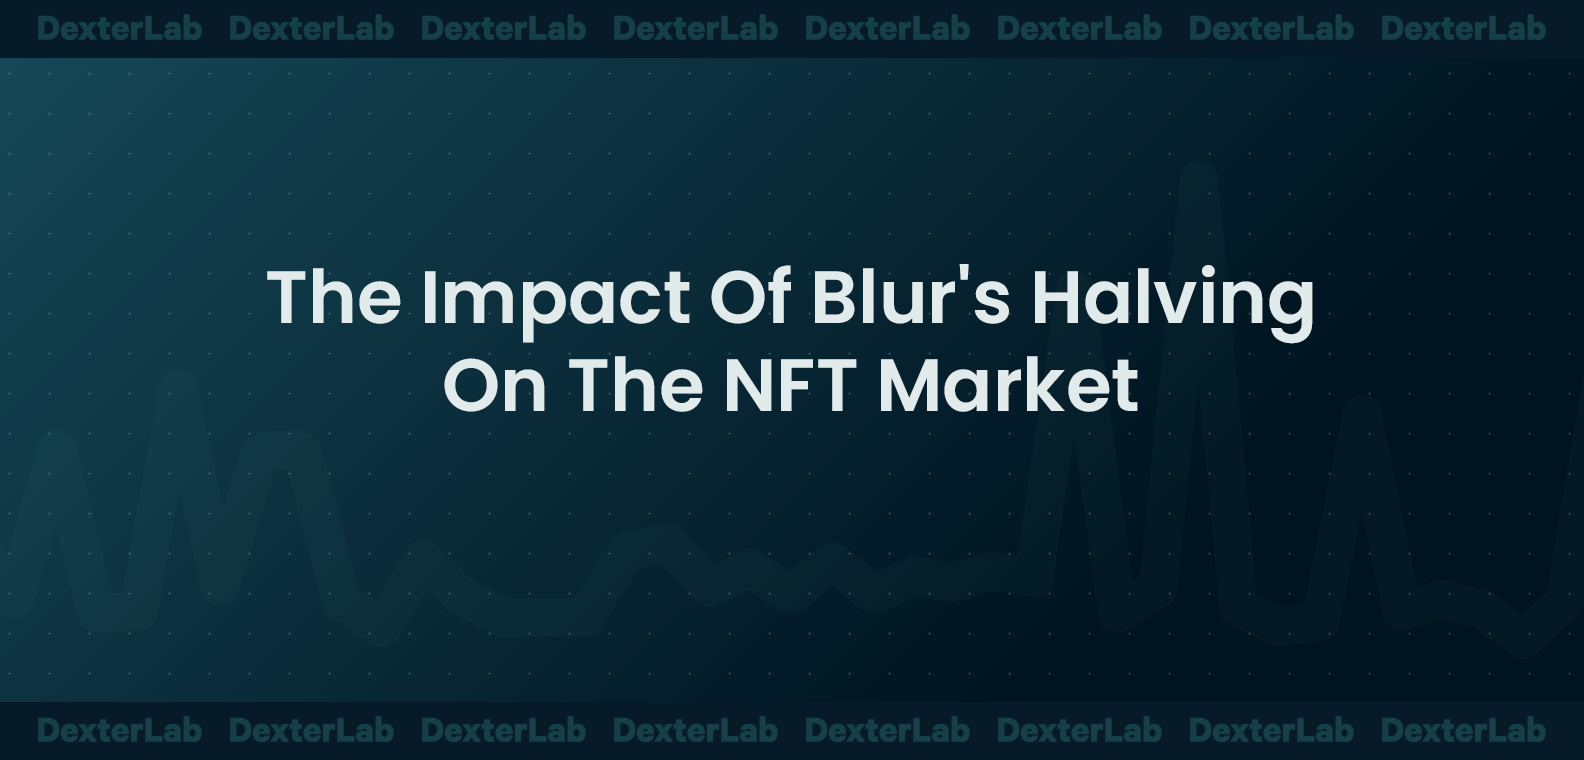 The Impact Of Blur's Halving On The NFT Market